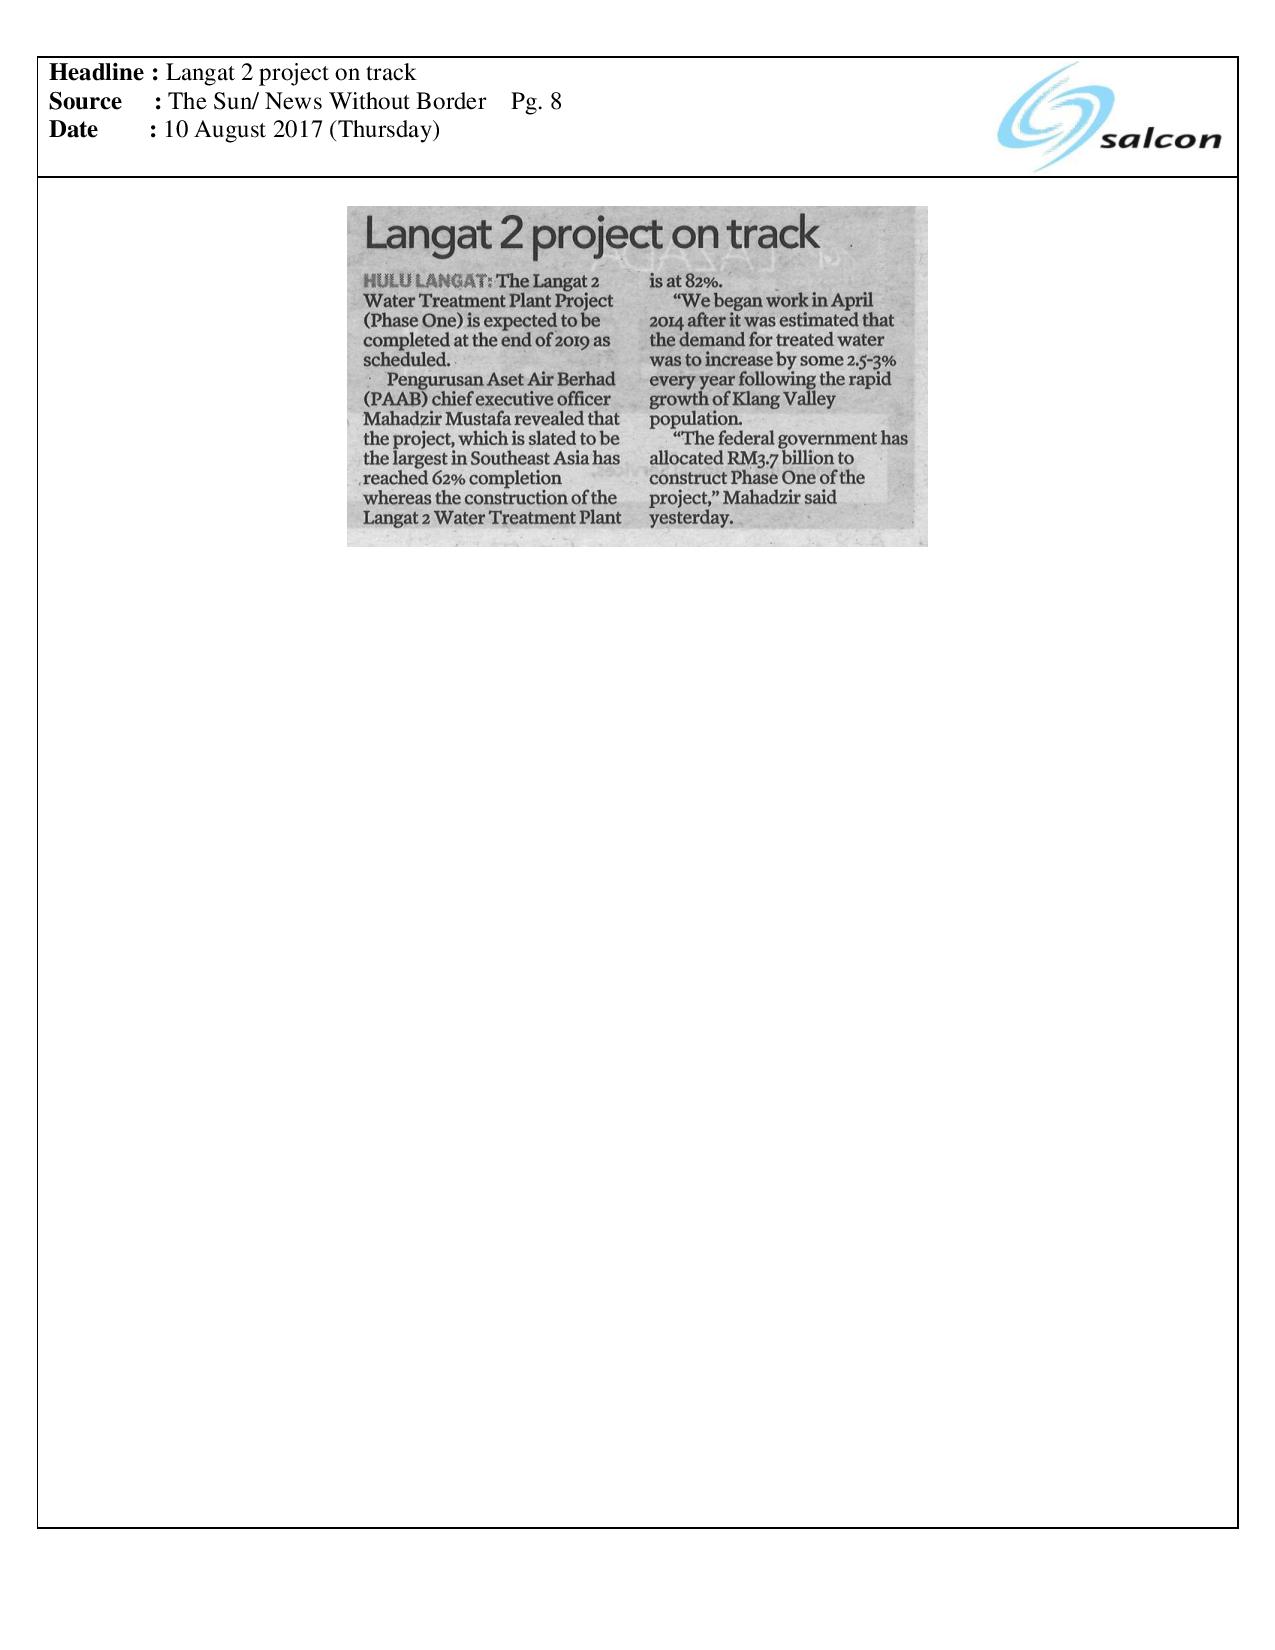 Langat 2 project on track